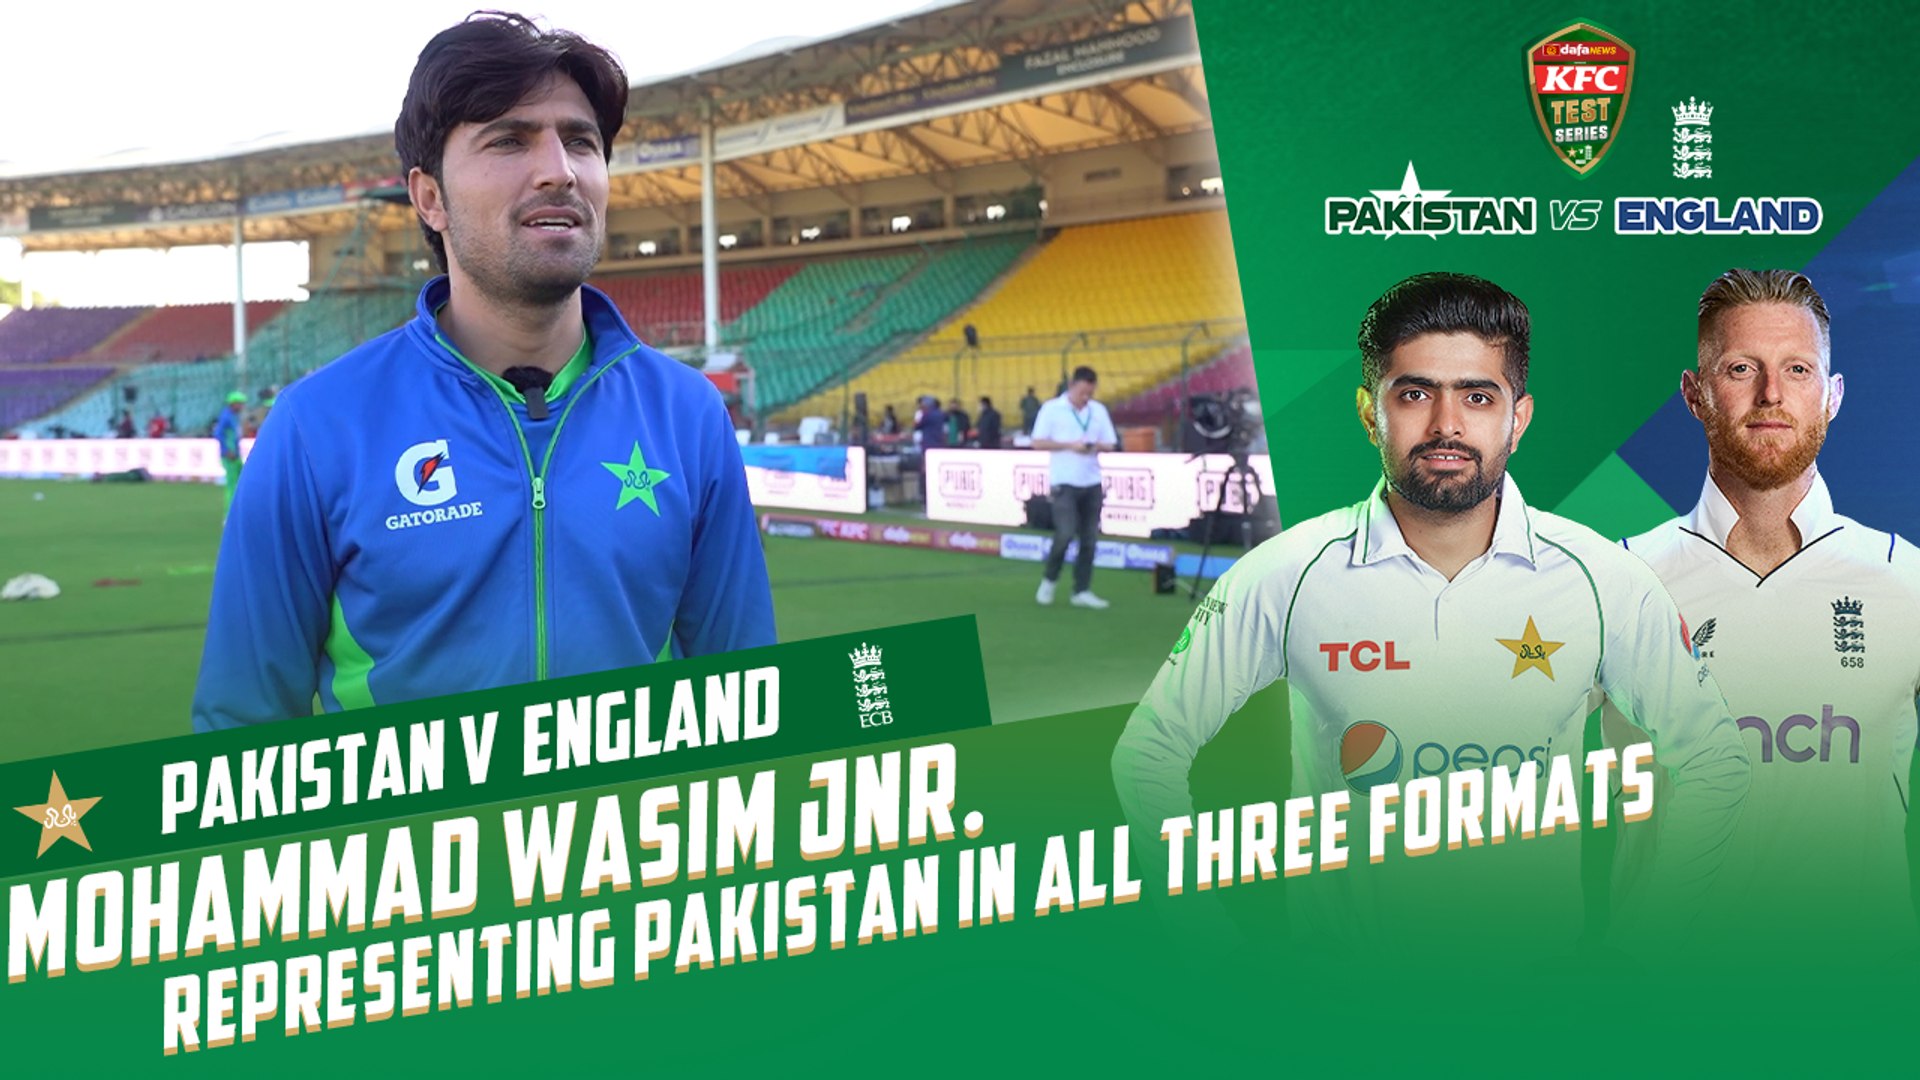 Representing Pakistan in all three formats ✓ A proud moment for Mohammad Wasim Jnr PCB MY2T